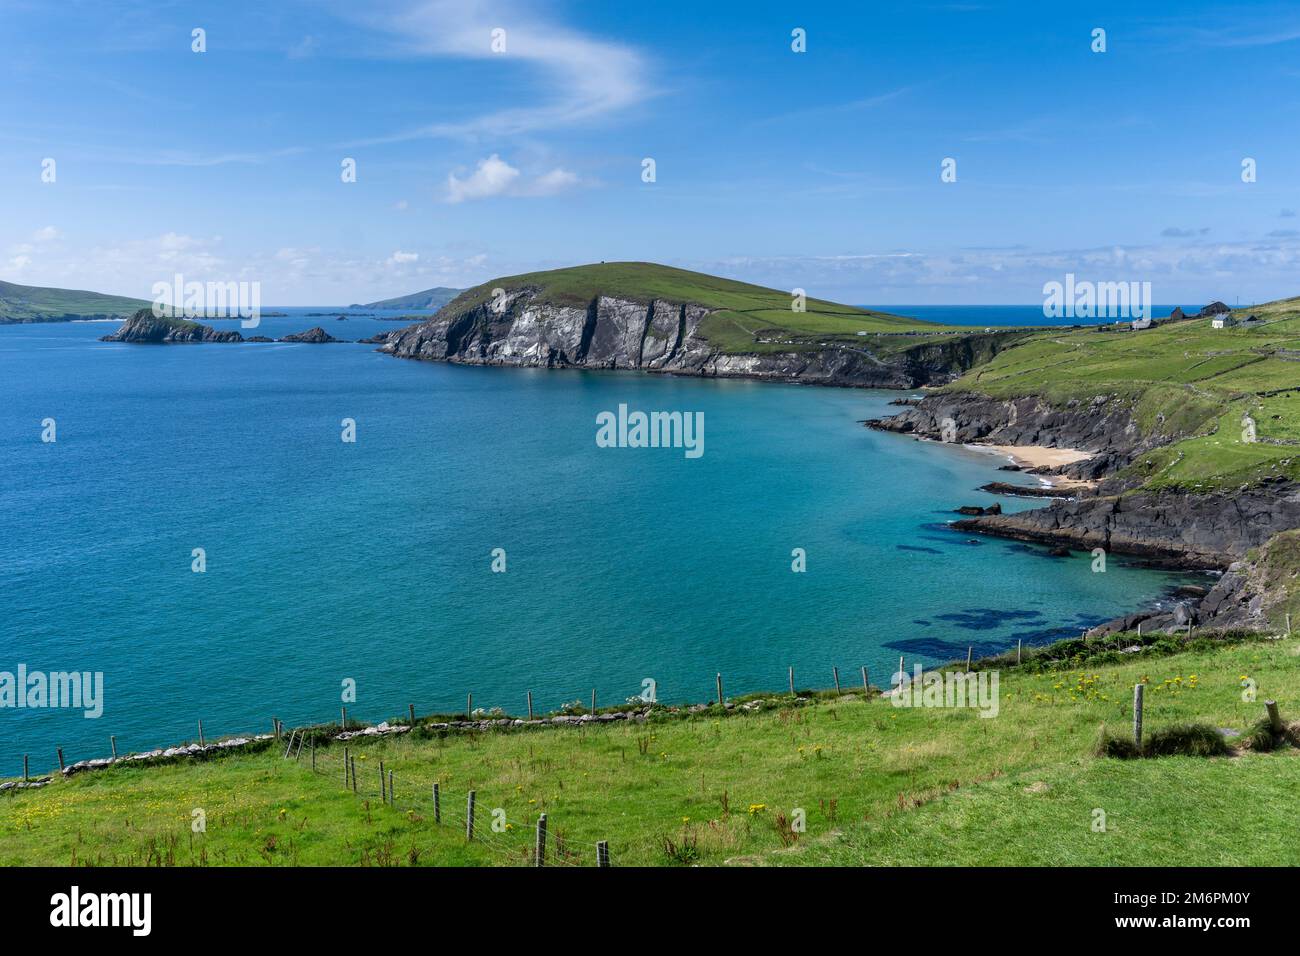 Landscape view of the turquoise waters and golden sand beach at Slea Head on the Dingle Peninsula of Stock Photo